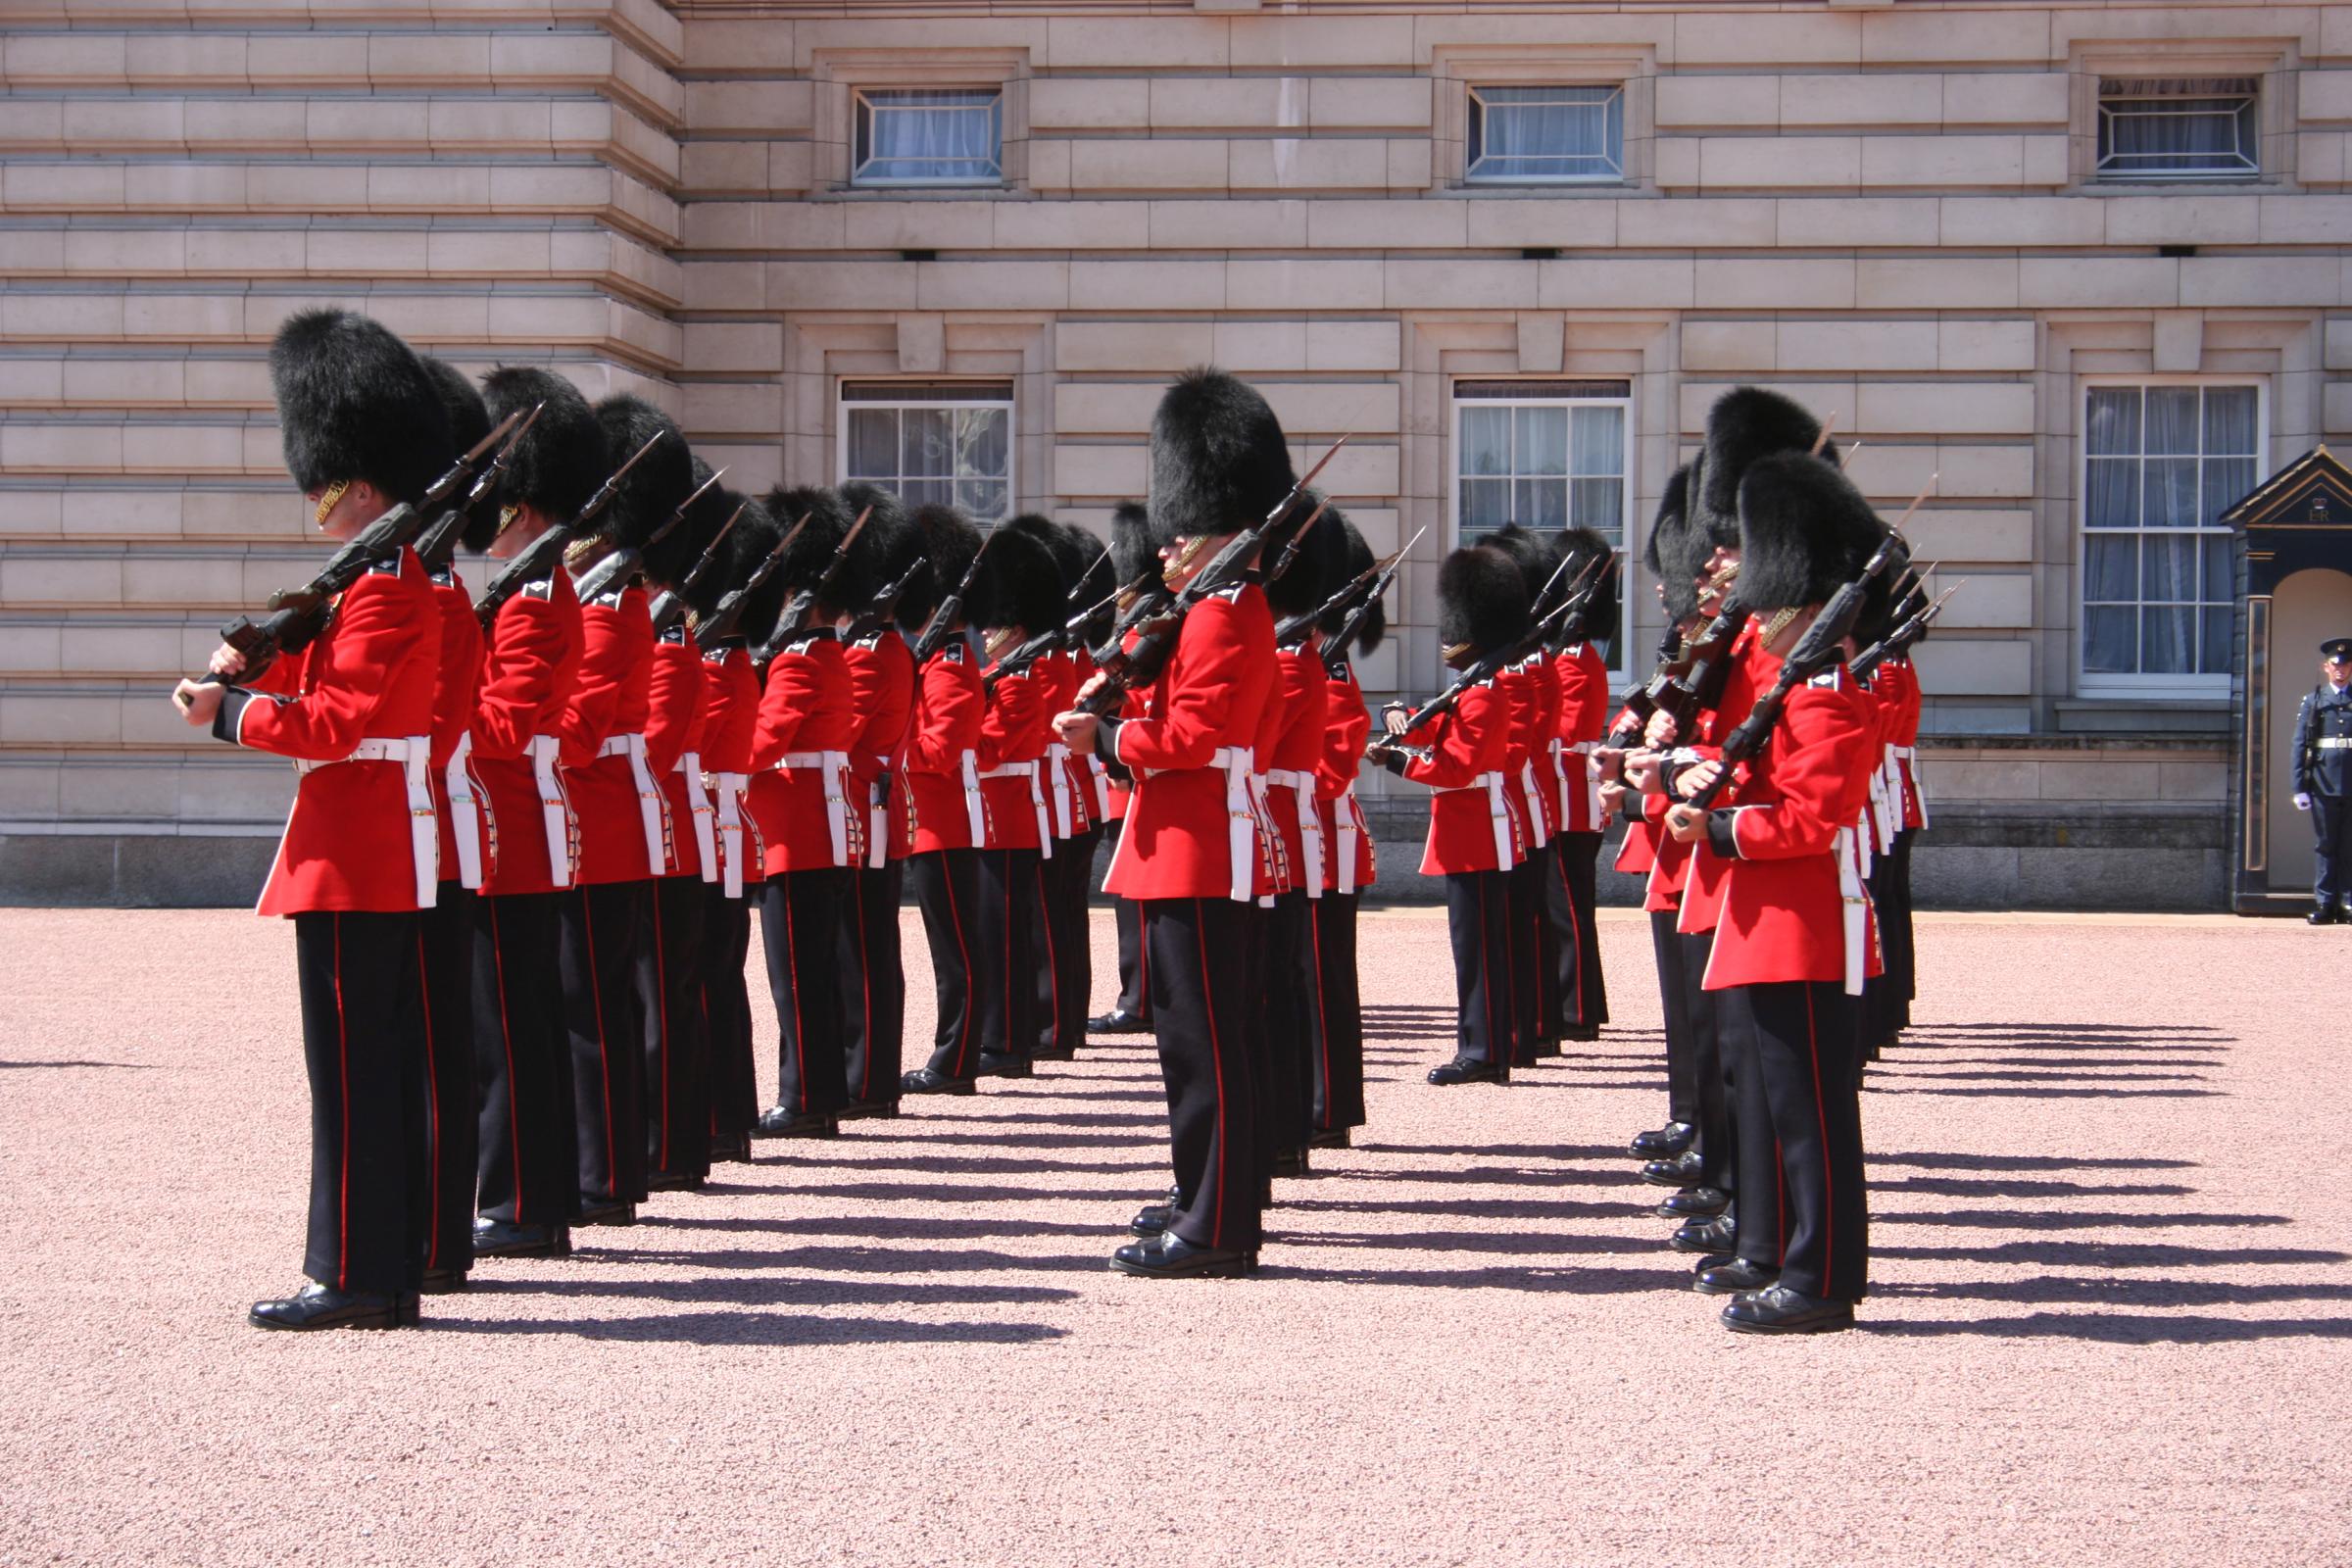 Changing of the guards, with rifle